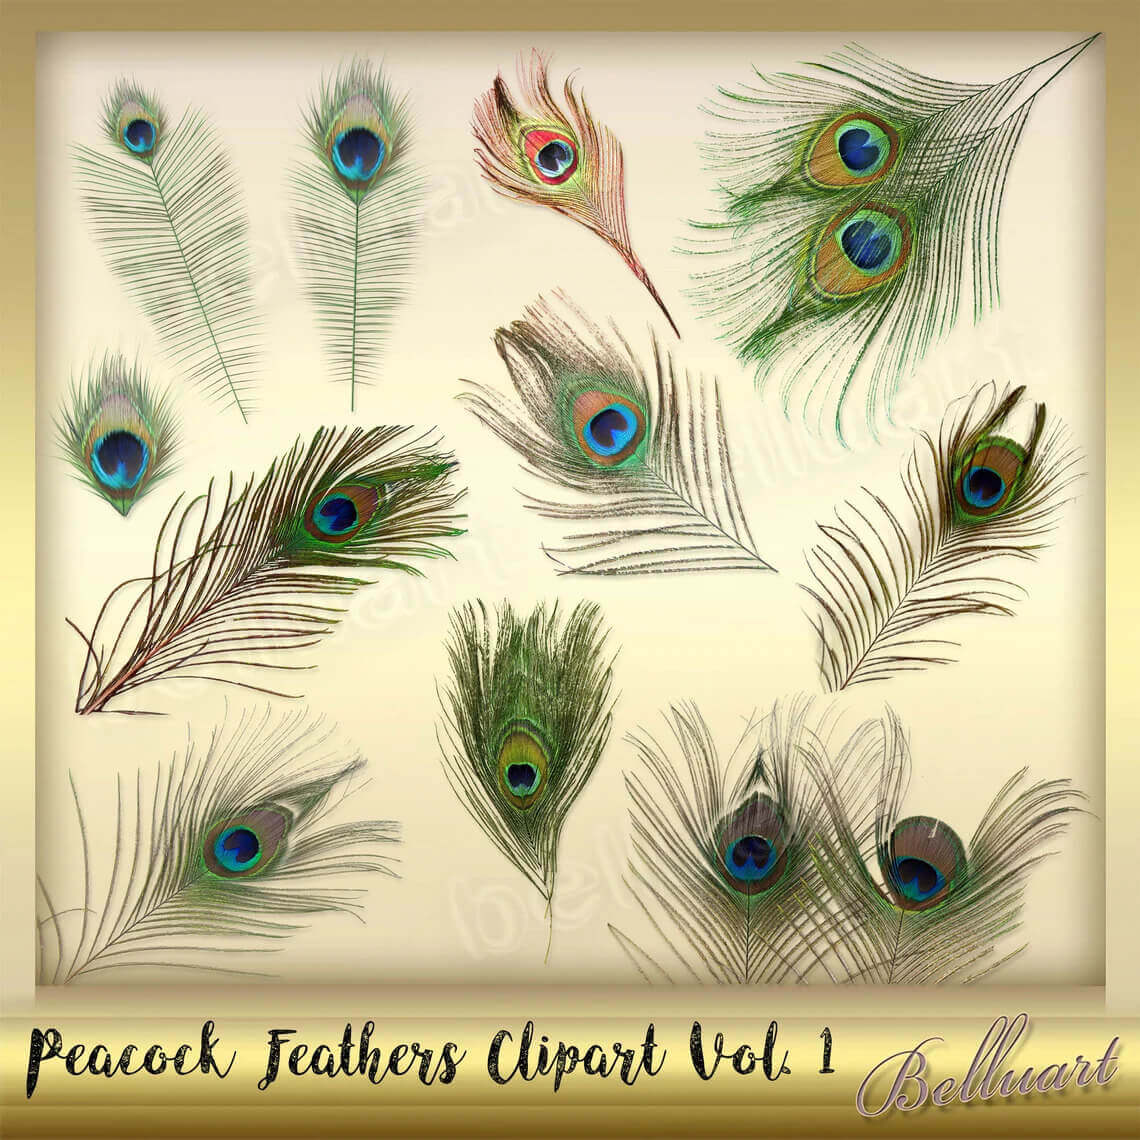 Peacock feathers clipart vol 1 collection.